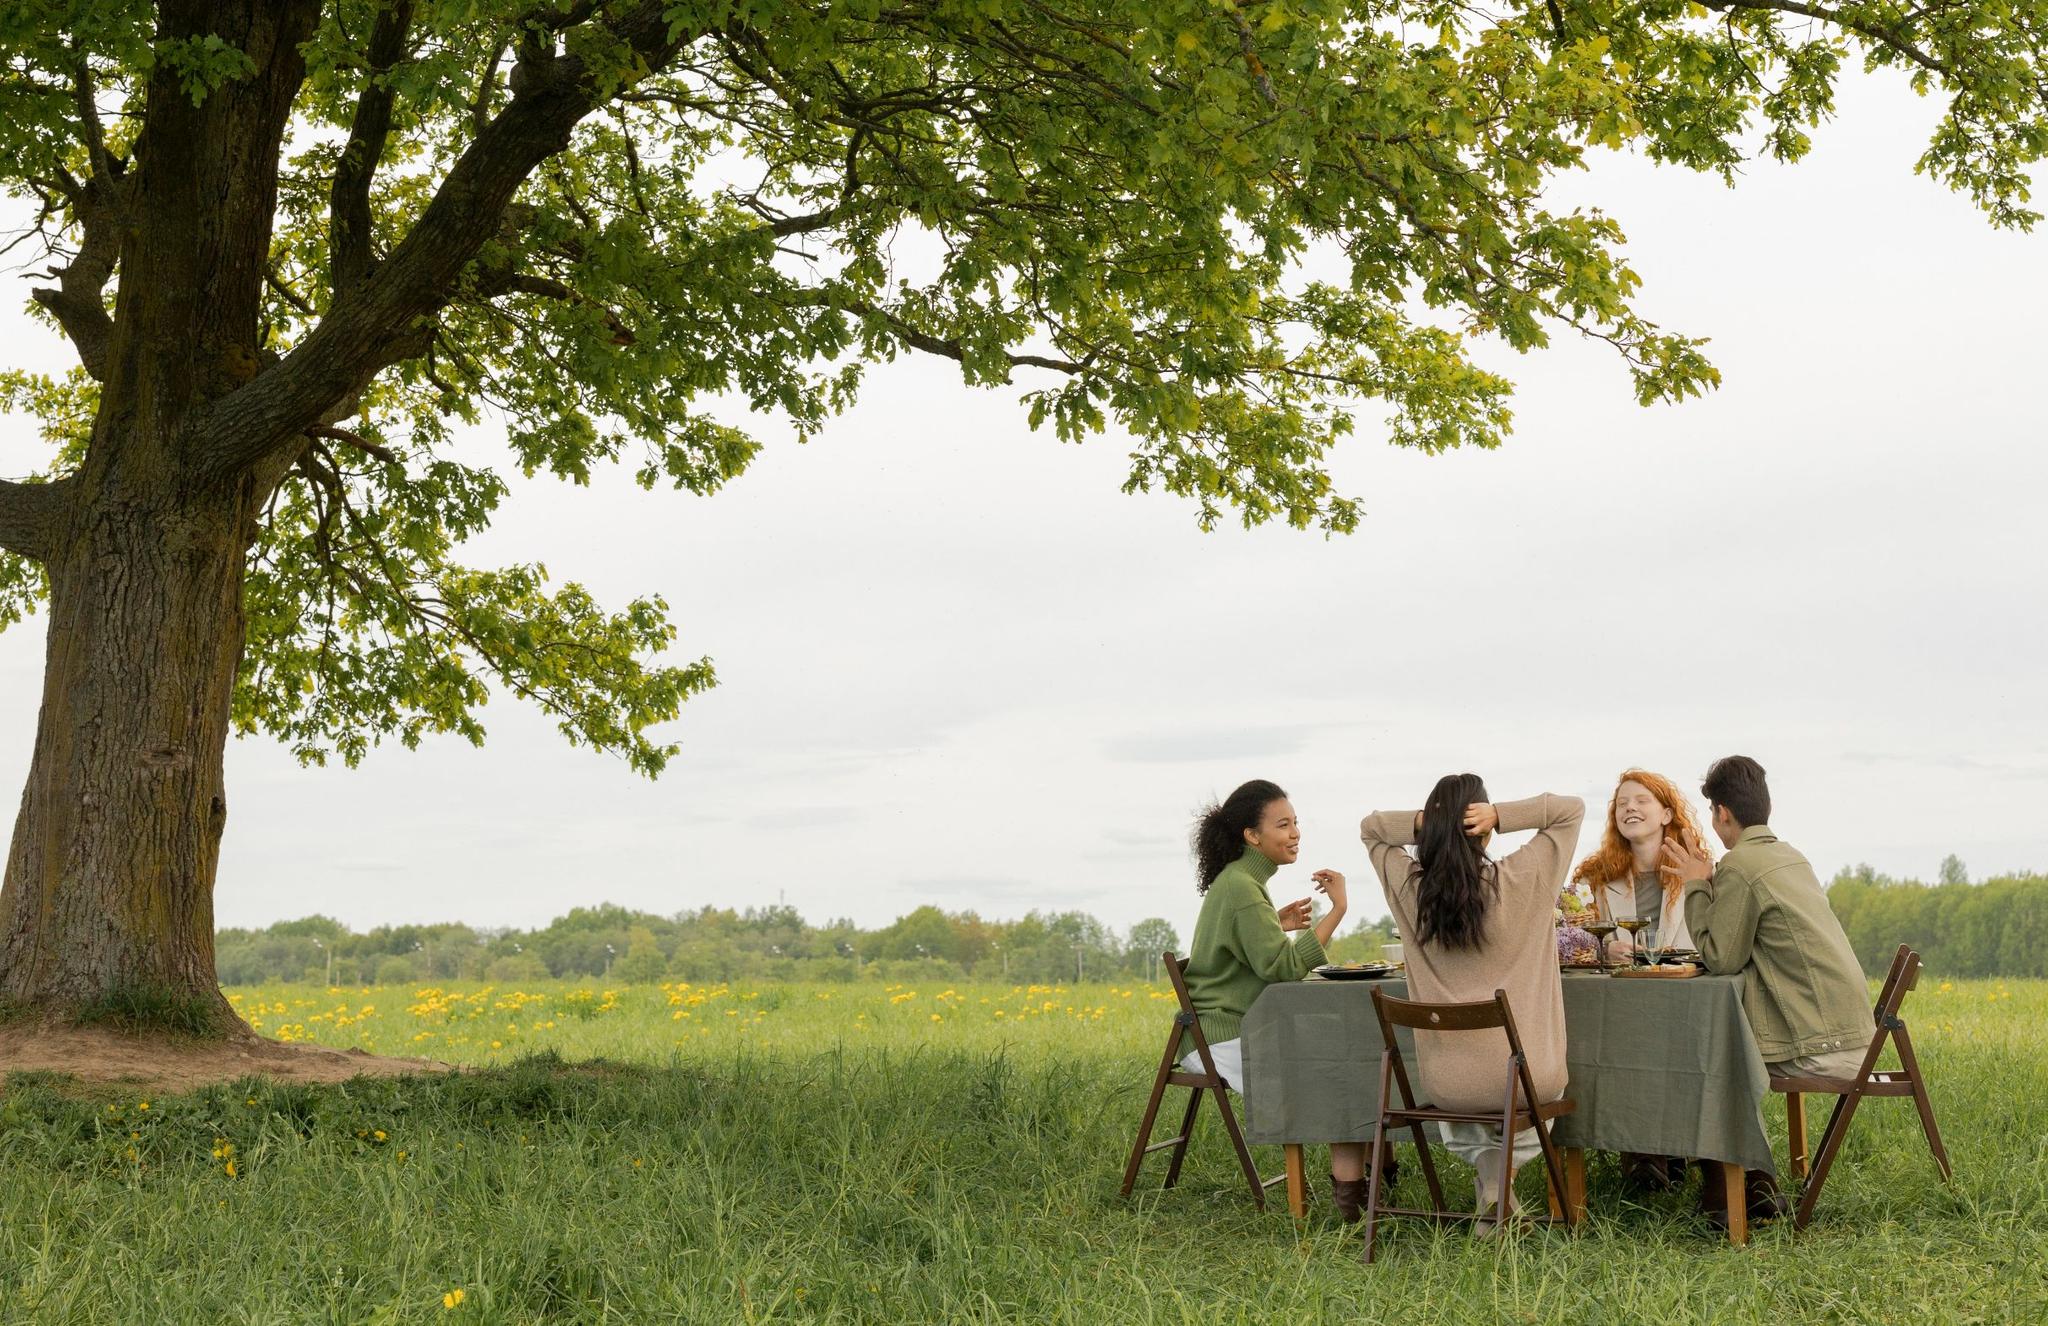 Ladies sitting in a field having a picnic draft